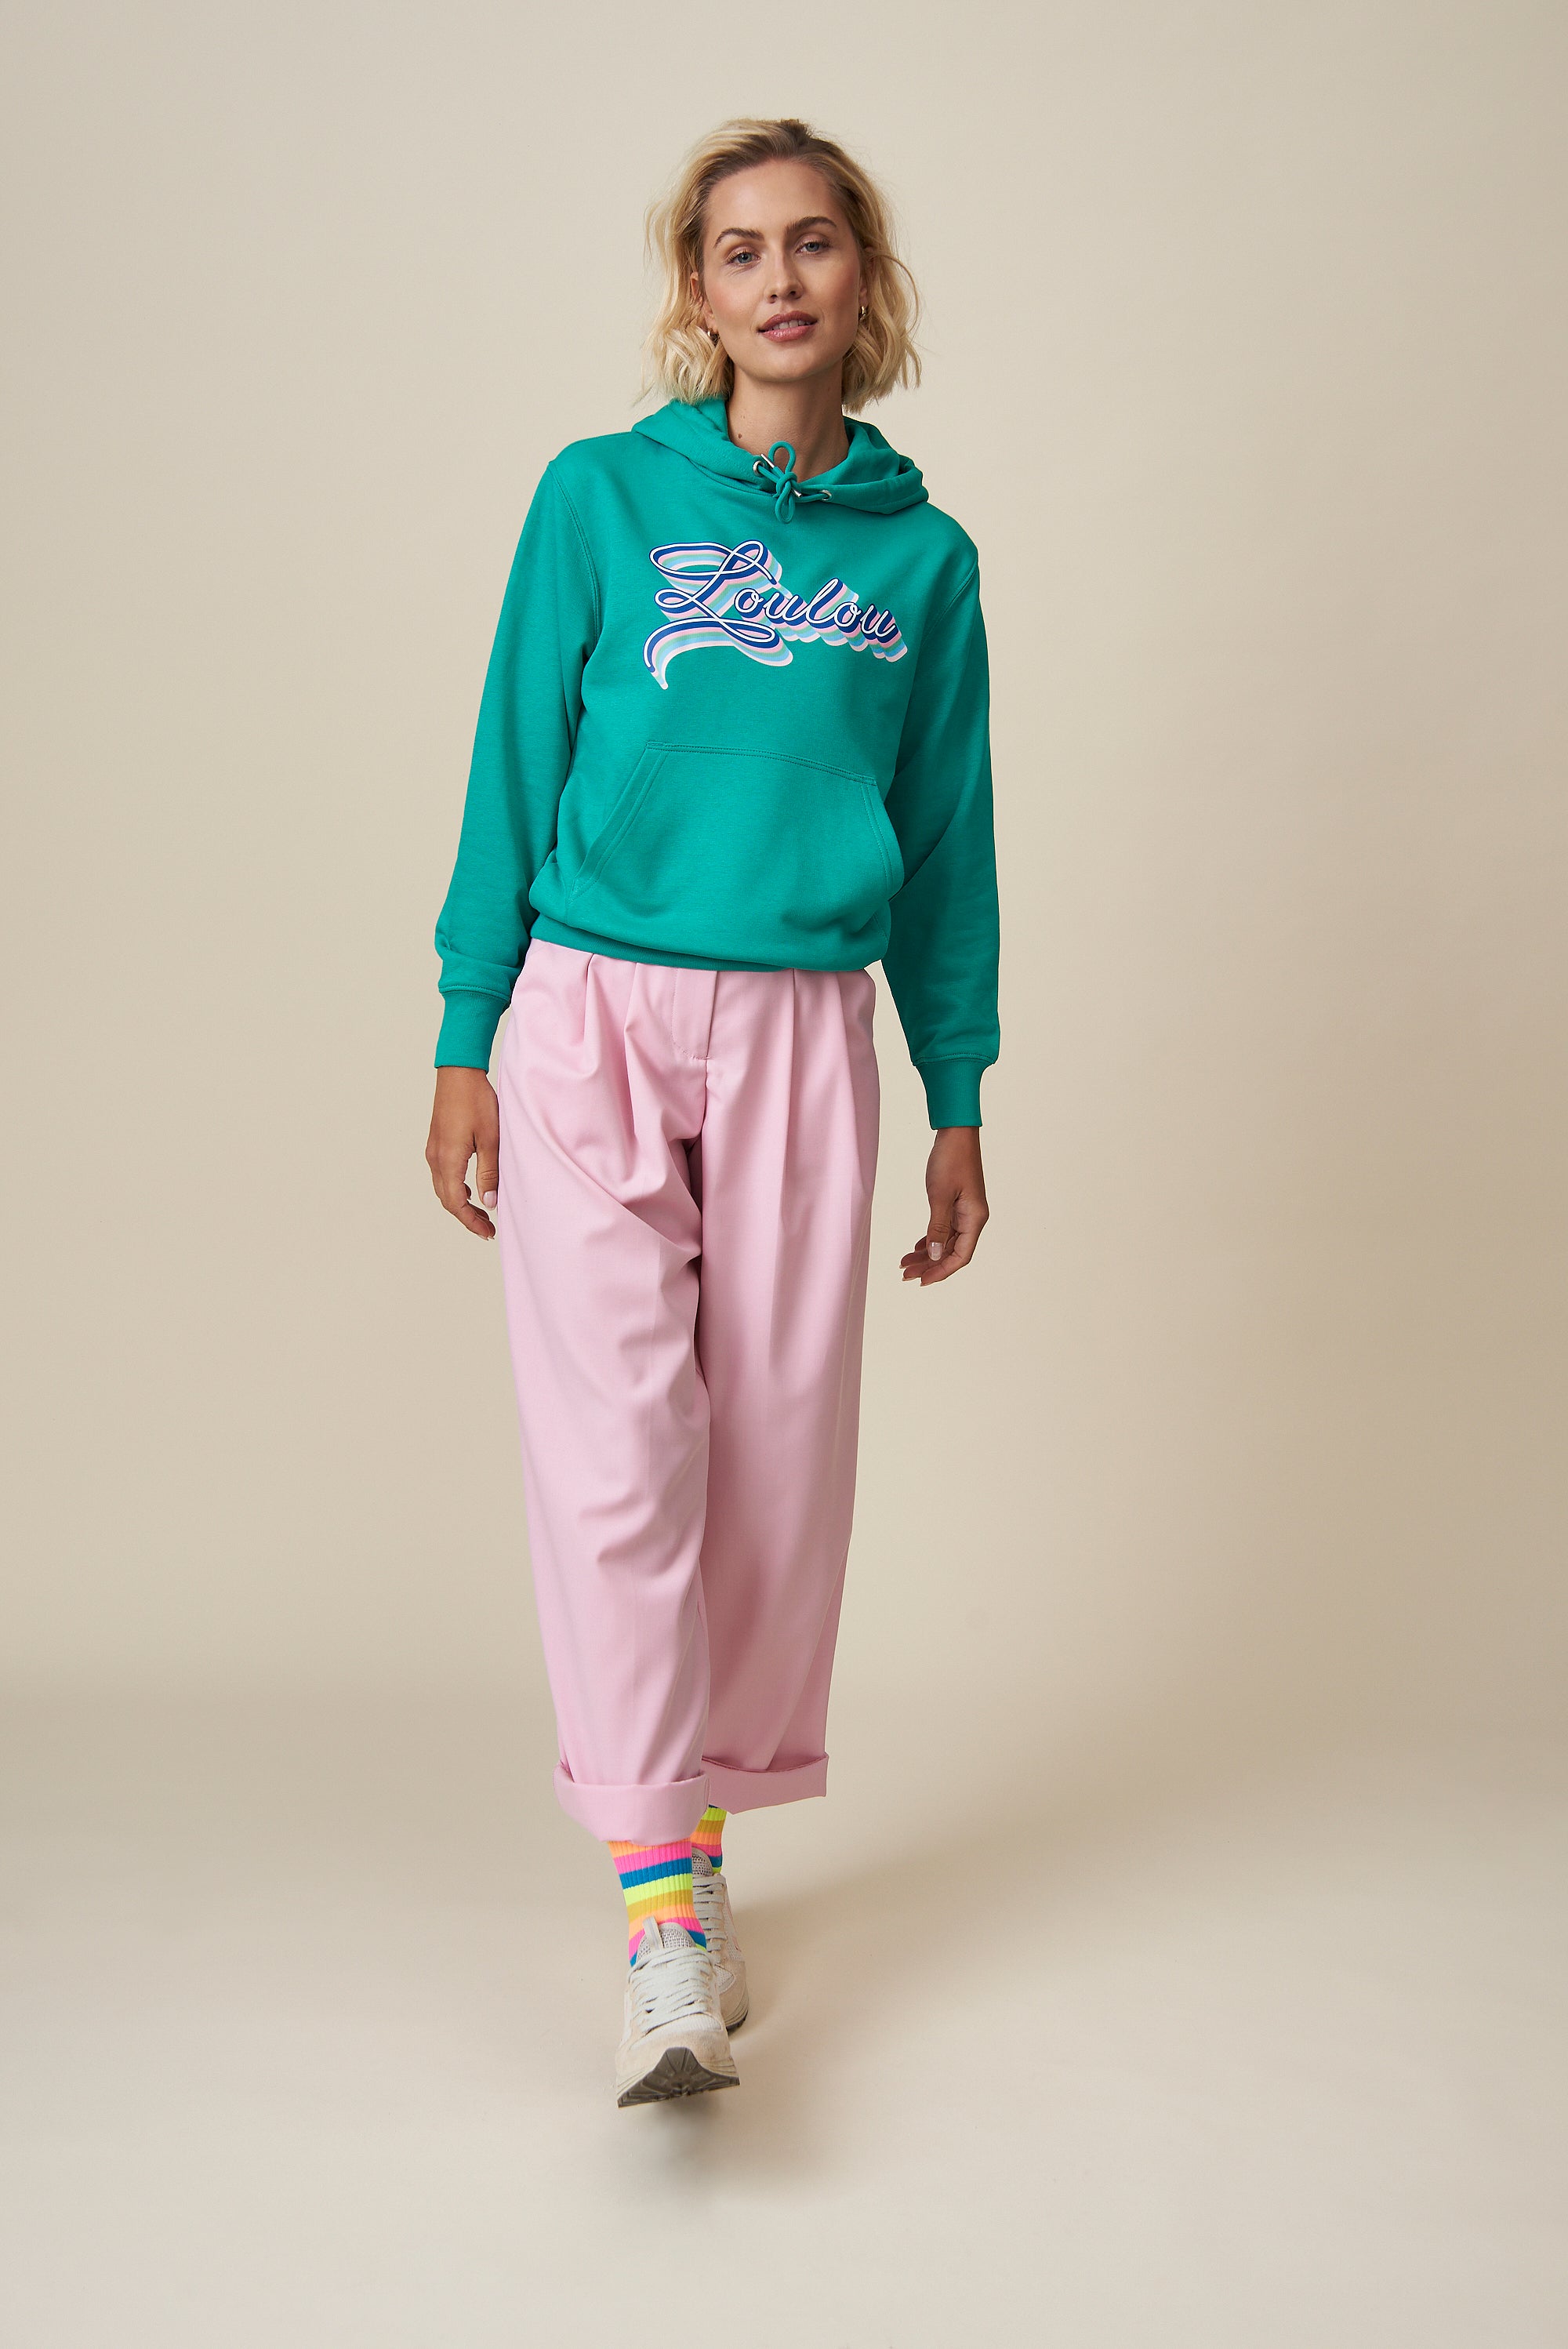 Loulou Hoodie - Turquoise Green / Pastel